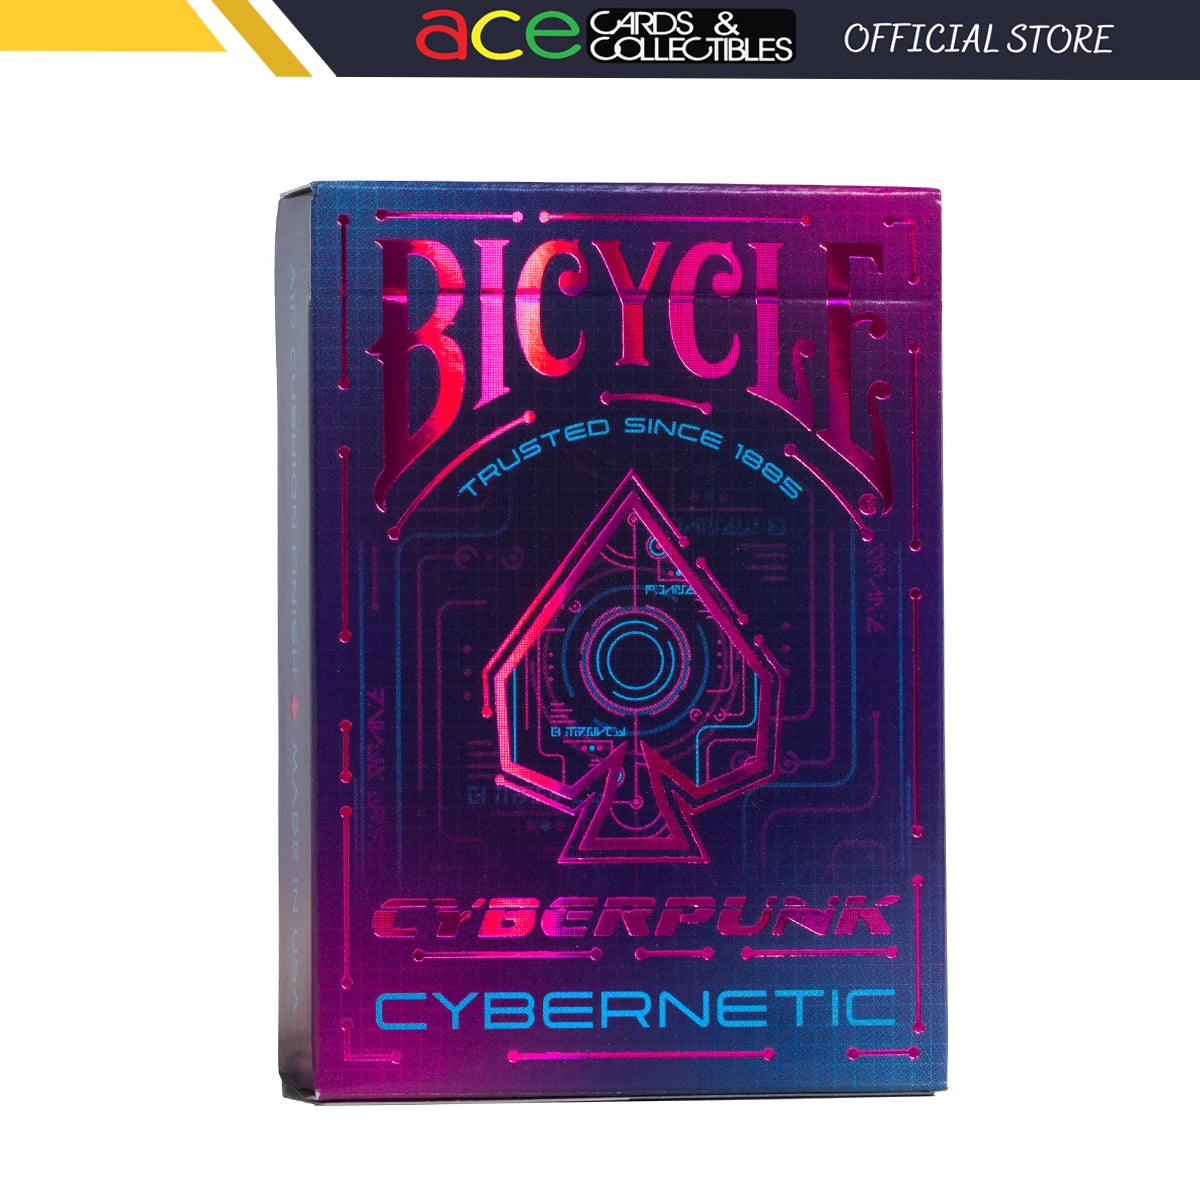 Bicycle Cyberpunk Cybernetic Playing Cards-United States Playing Cards Company-Ace Cards &amp; Collectibles